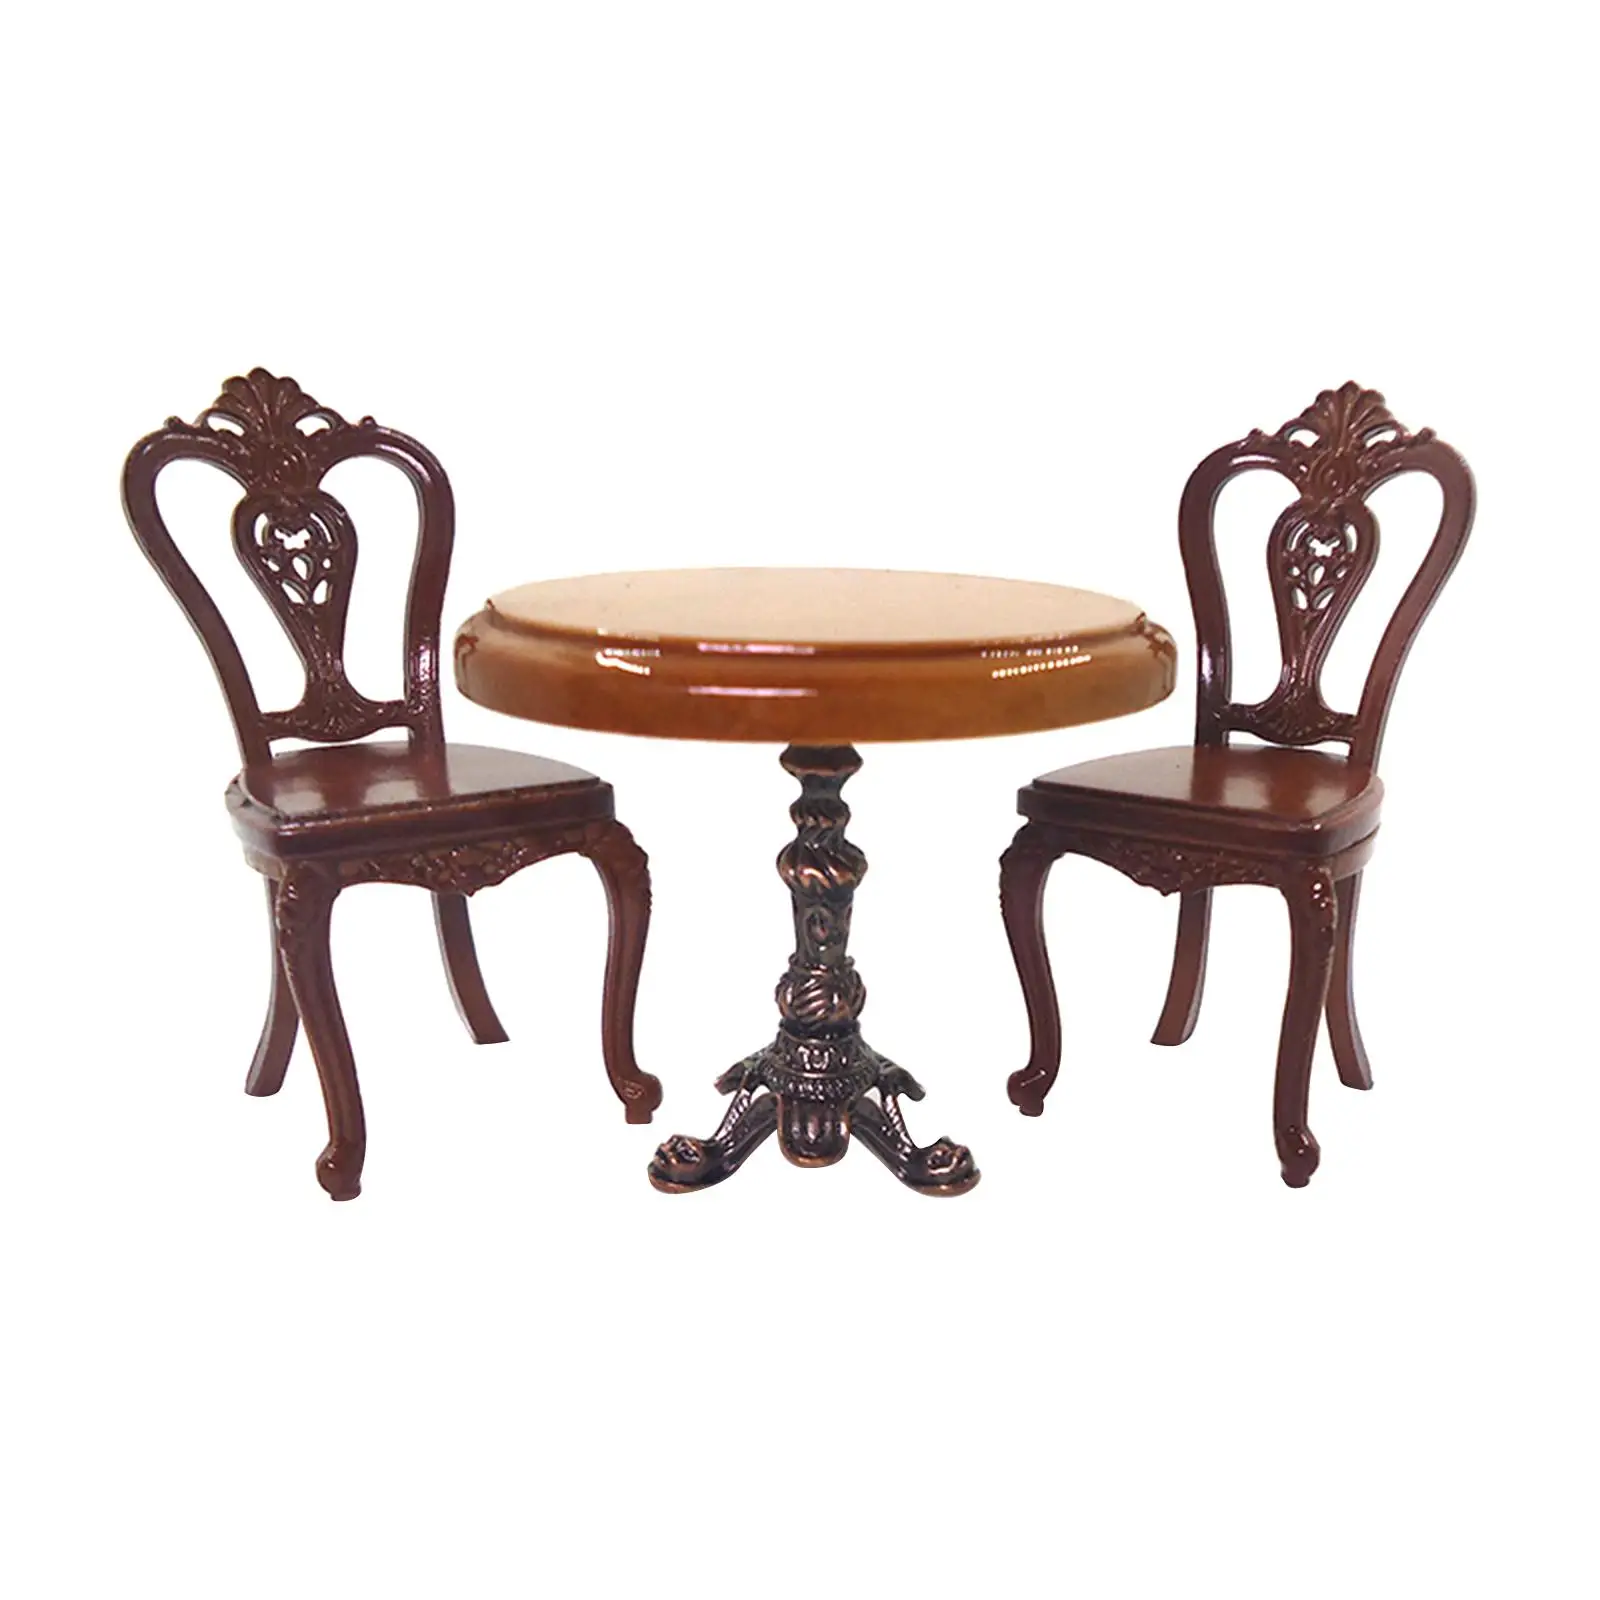 3x 1/12 Wooden Round Table and Chairs Life Scene Furniture Kitchen Decor